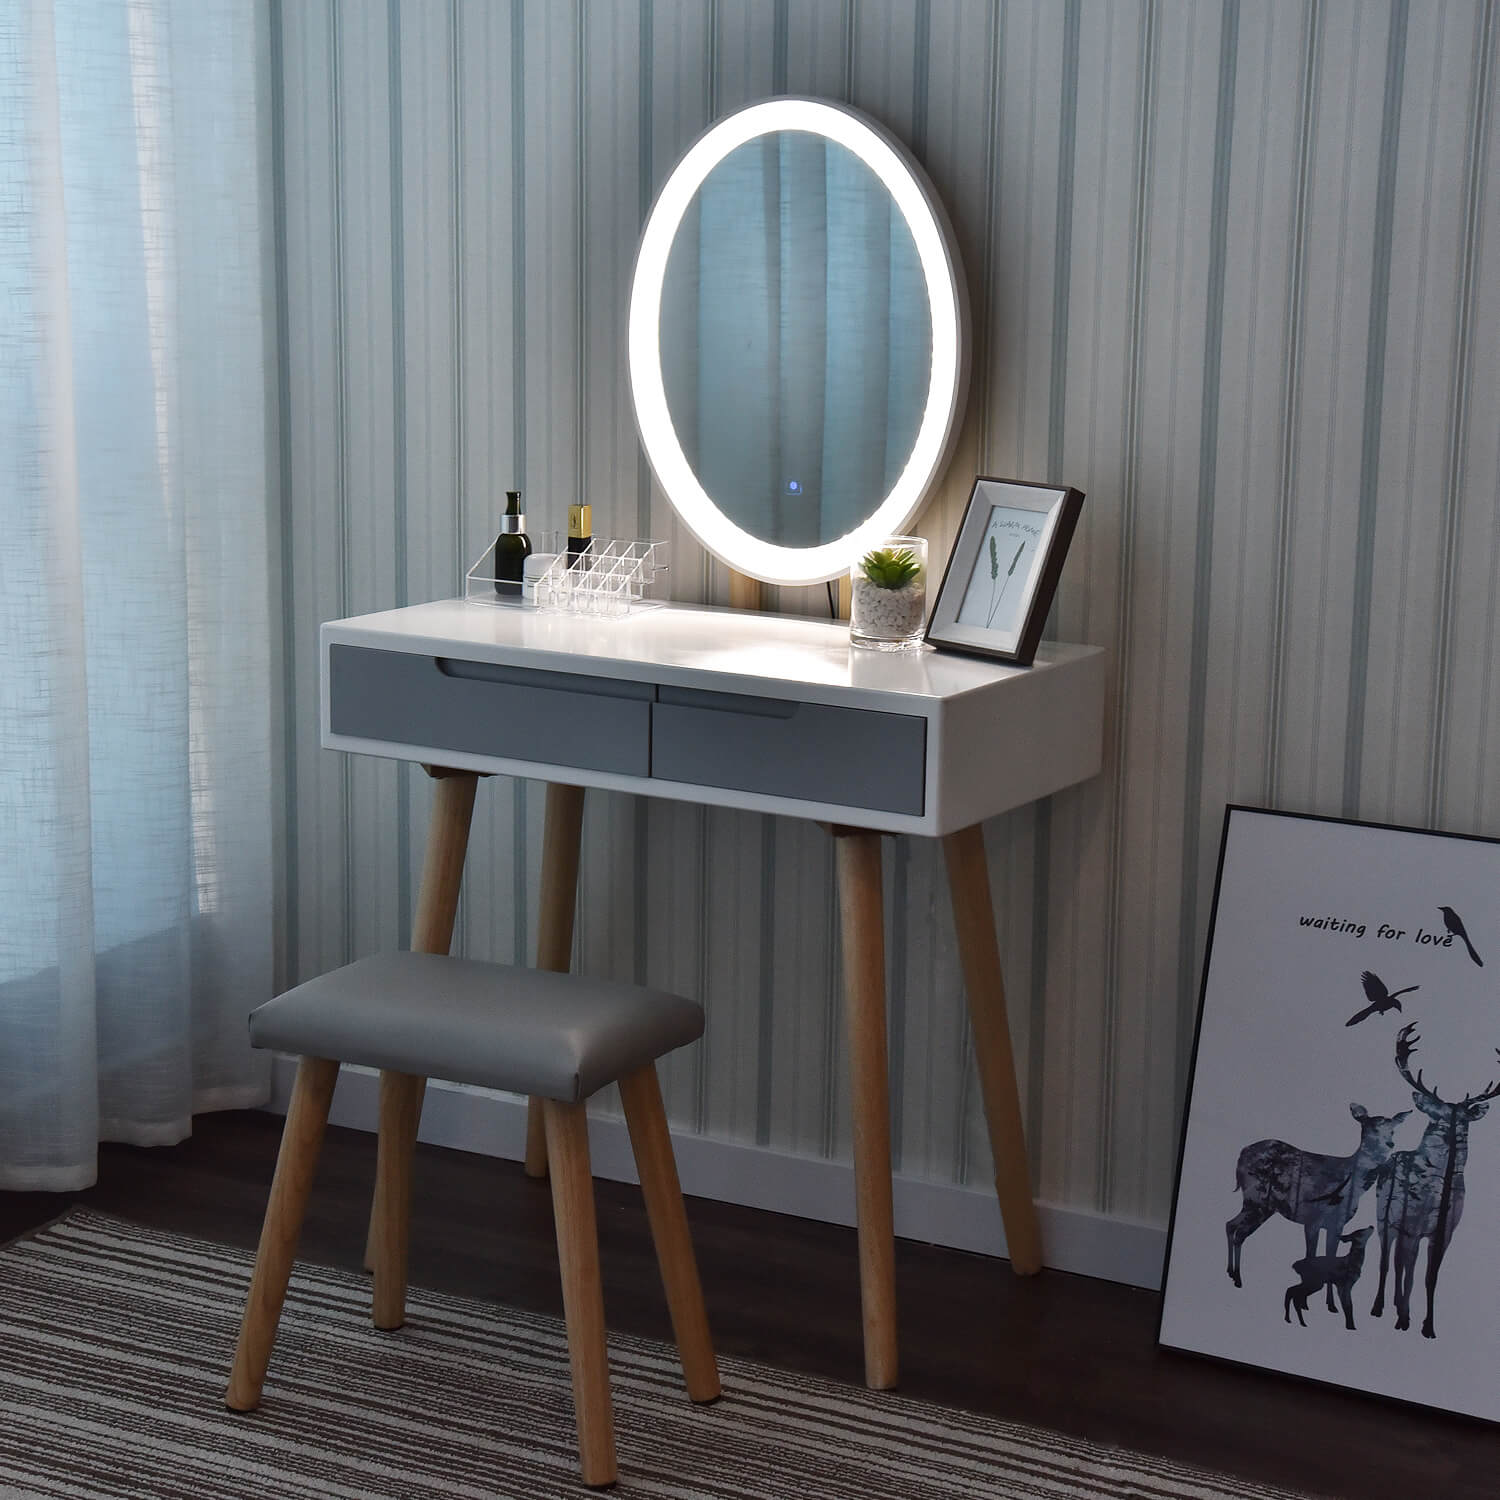 Elecwish 32" Makeup Vanity Table Stool Set Drawers with LED Oval Mirror 